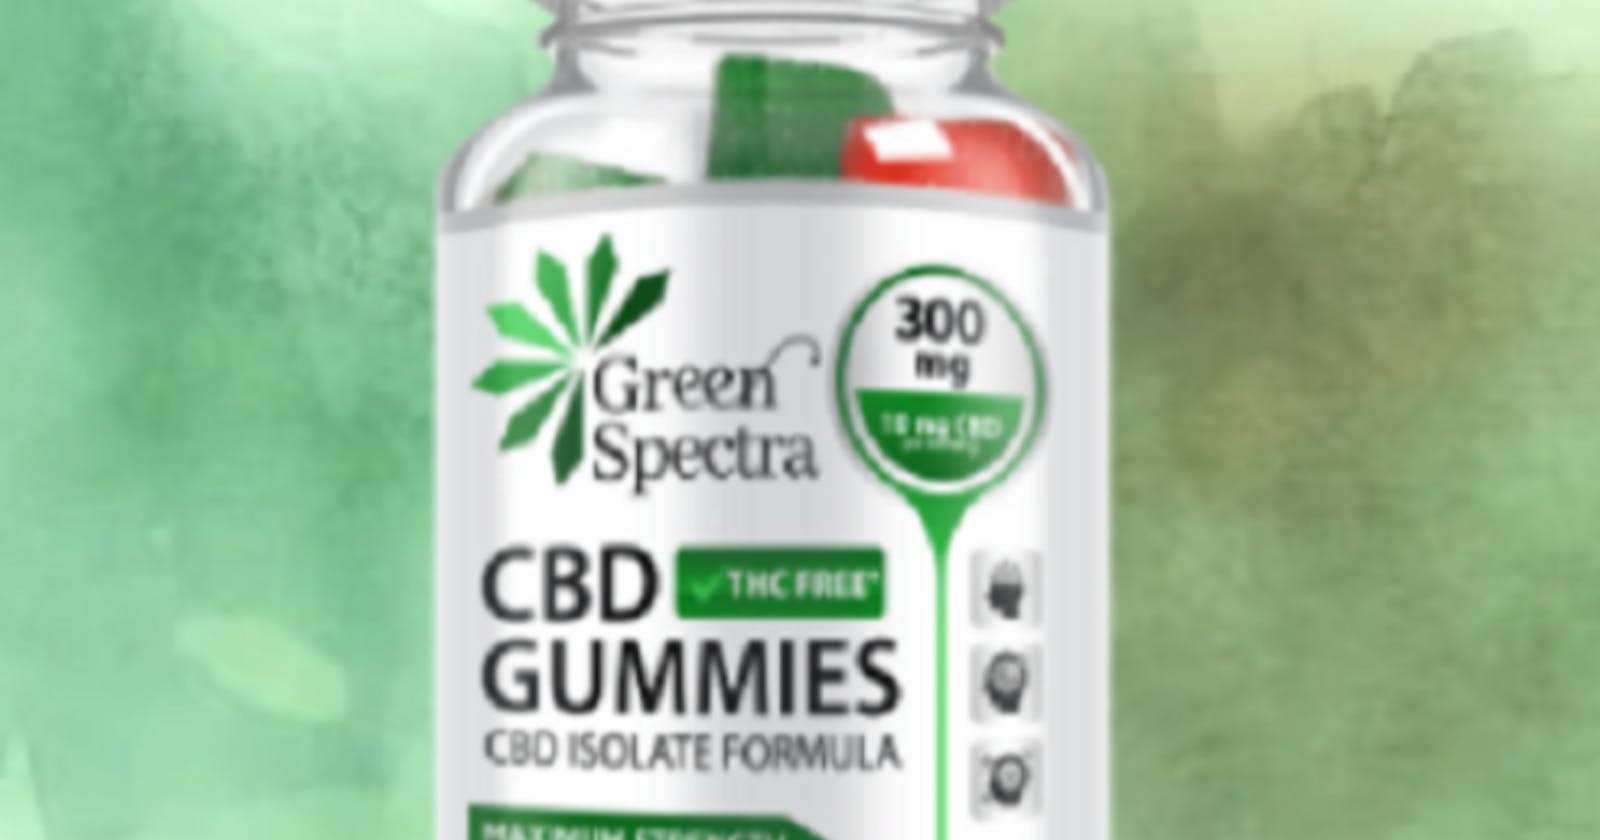 Green Spectra CBD Gummies | Reviews, Benefits, 100% Safe & Pure, Price, Offers, Where To Buy?